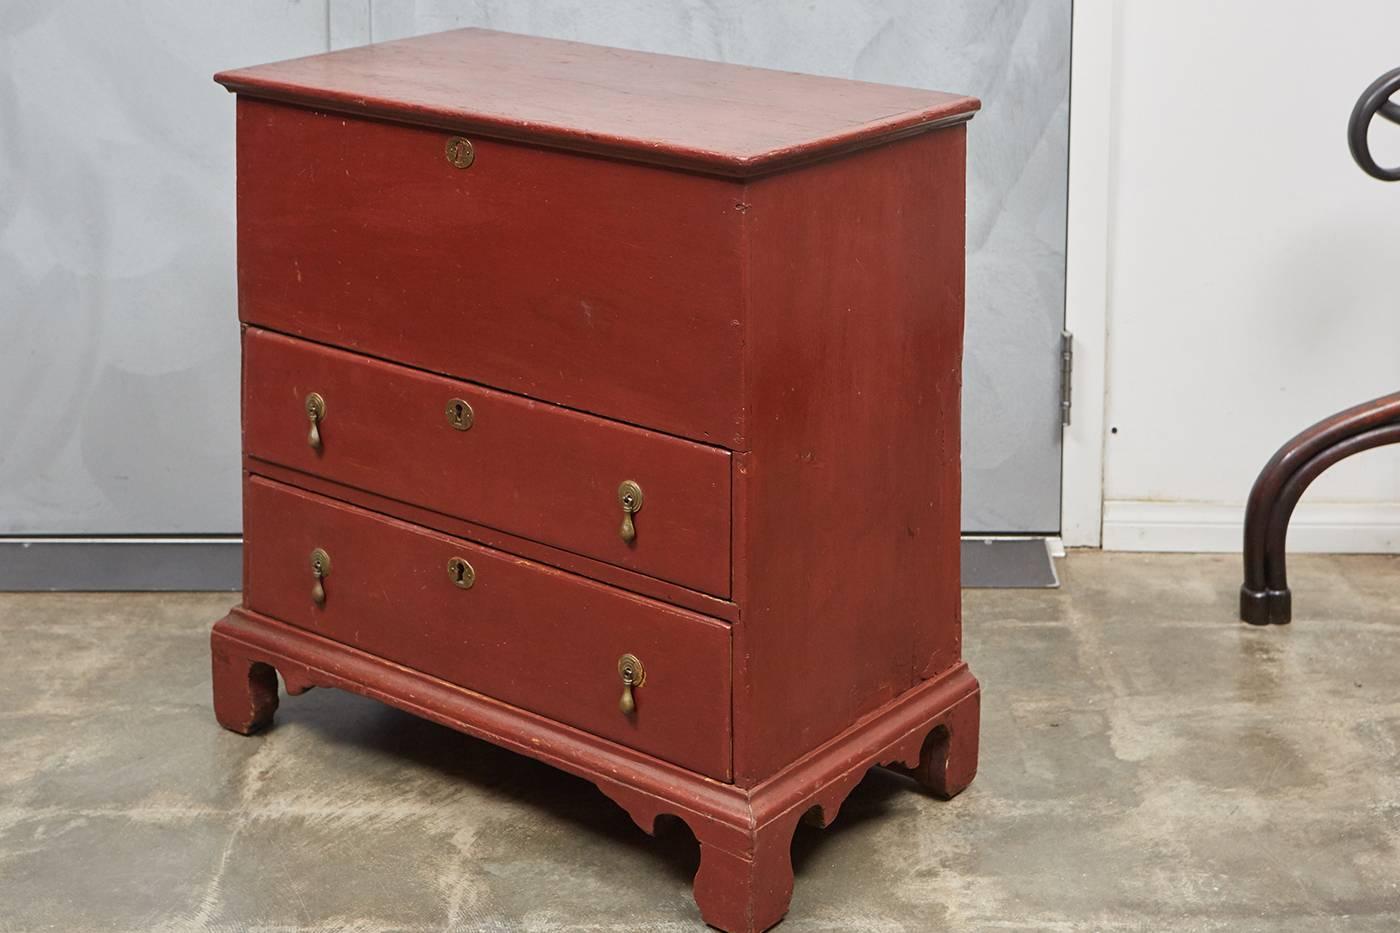 This small painted English blanket box has a hinged top and two drawers. The drawers have nicely shaped brass drop pull handles and escutcheons. From the construction and wear this piece appears to be from circa 1840s.

 